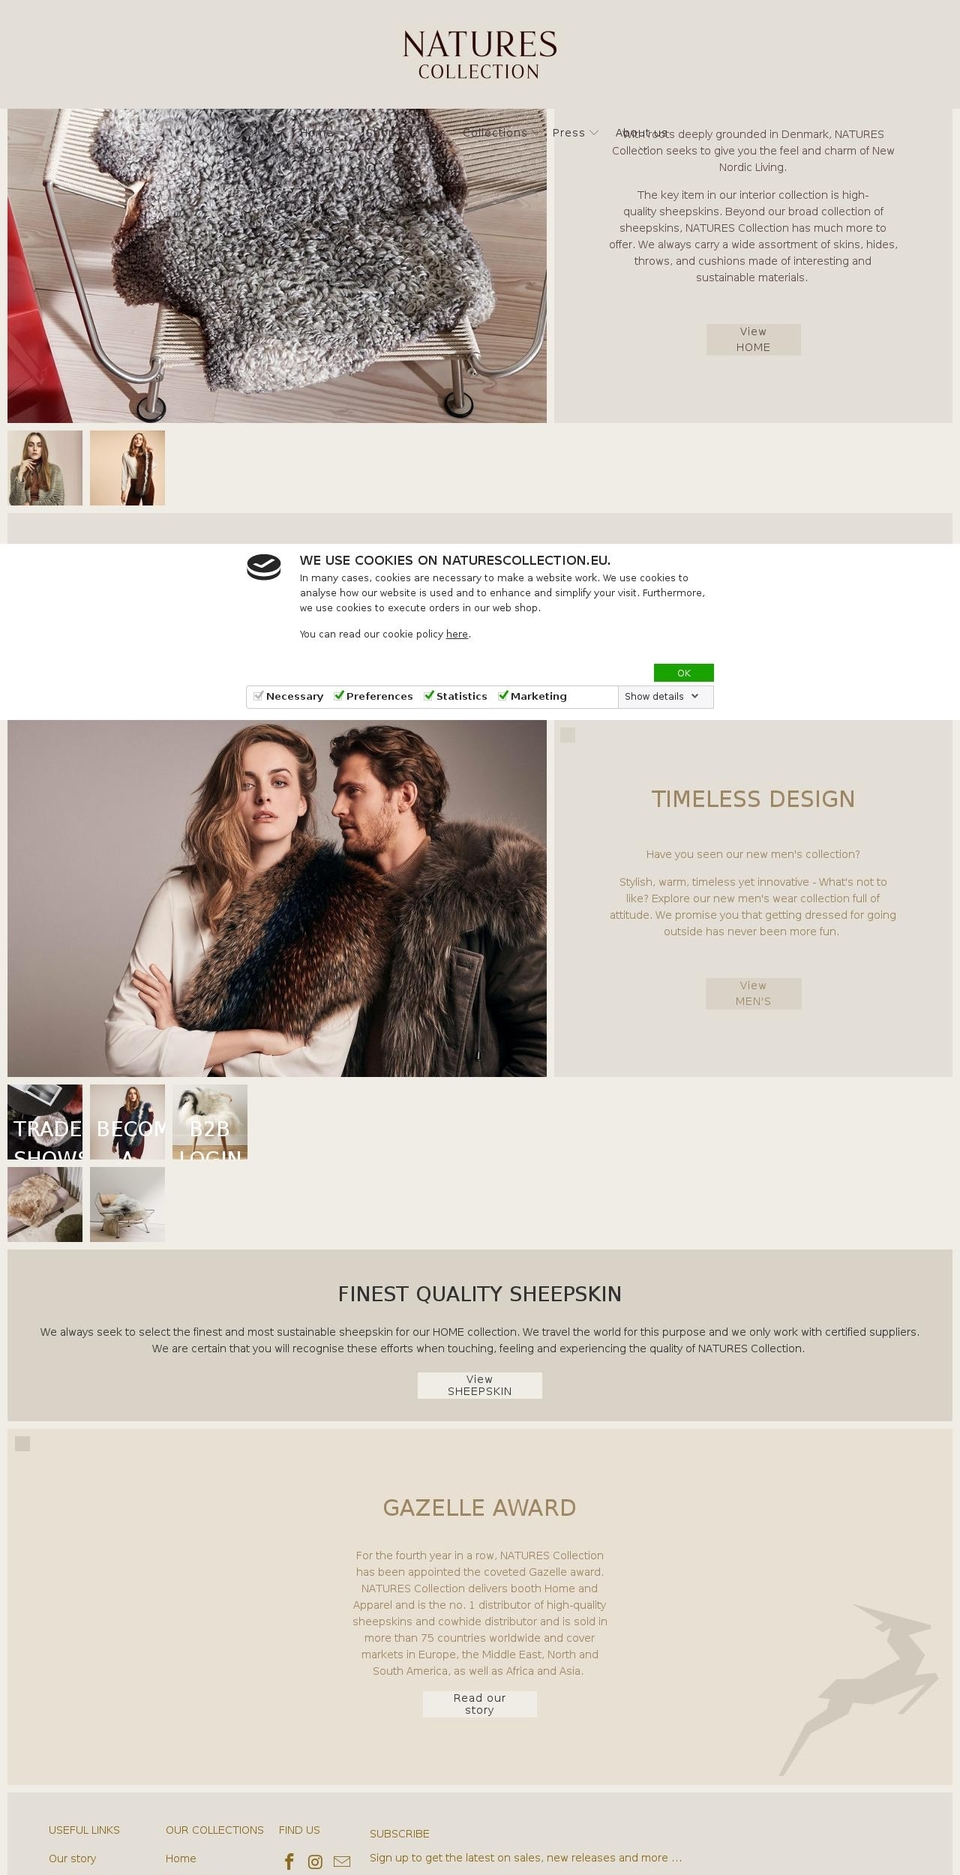 NY Rolf Shopify theme site example naturescollection.dk